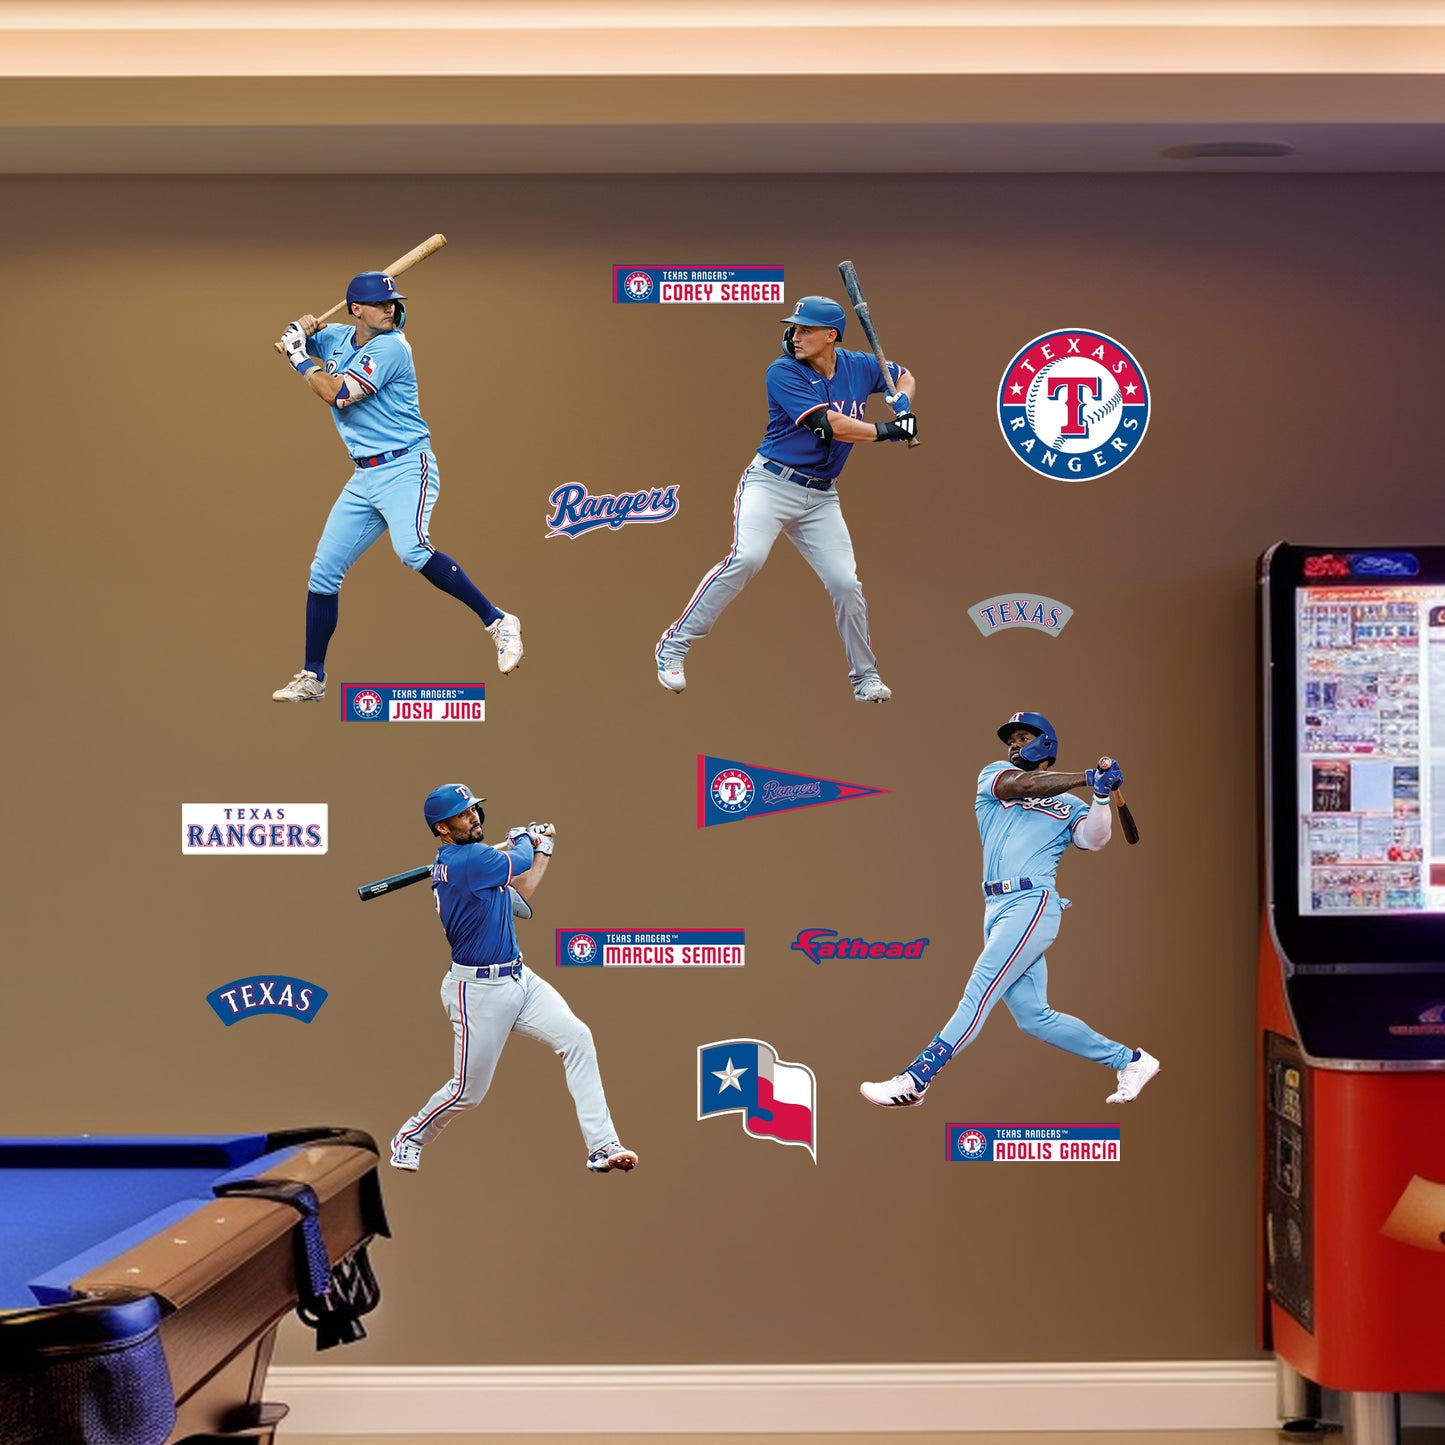 Texas Rangers: Corey Seager, Adolis García, Marcus Semien and Josh Jung Player Collection        - Officially Licensed MLB Removable     Adhesive Decal